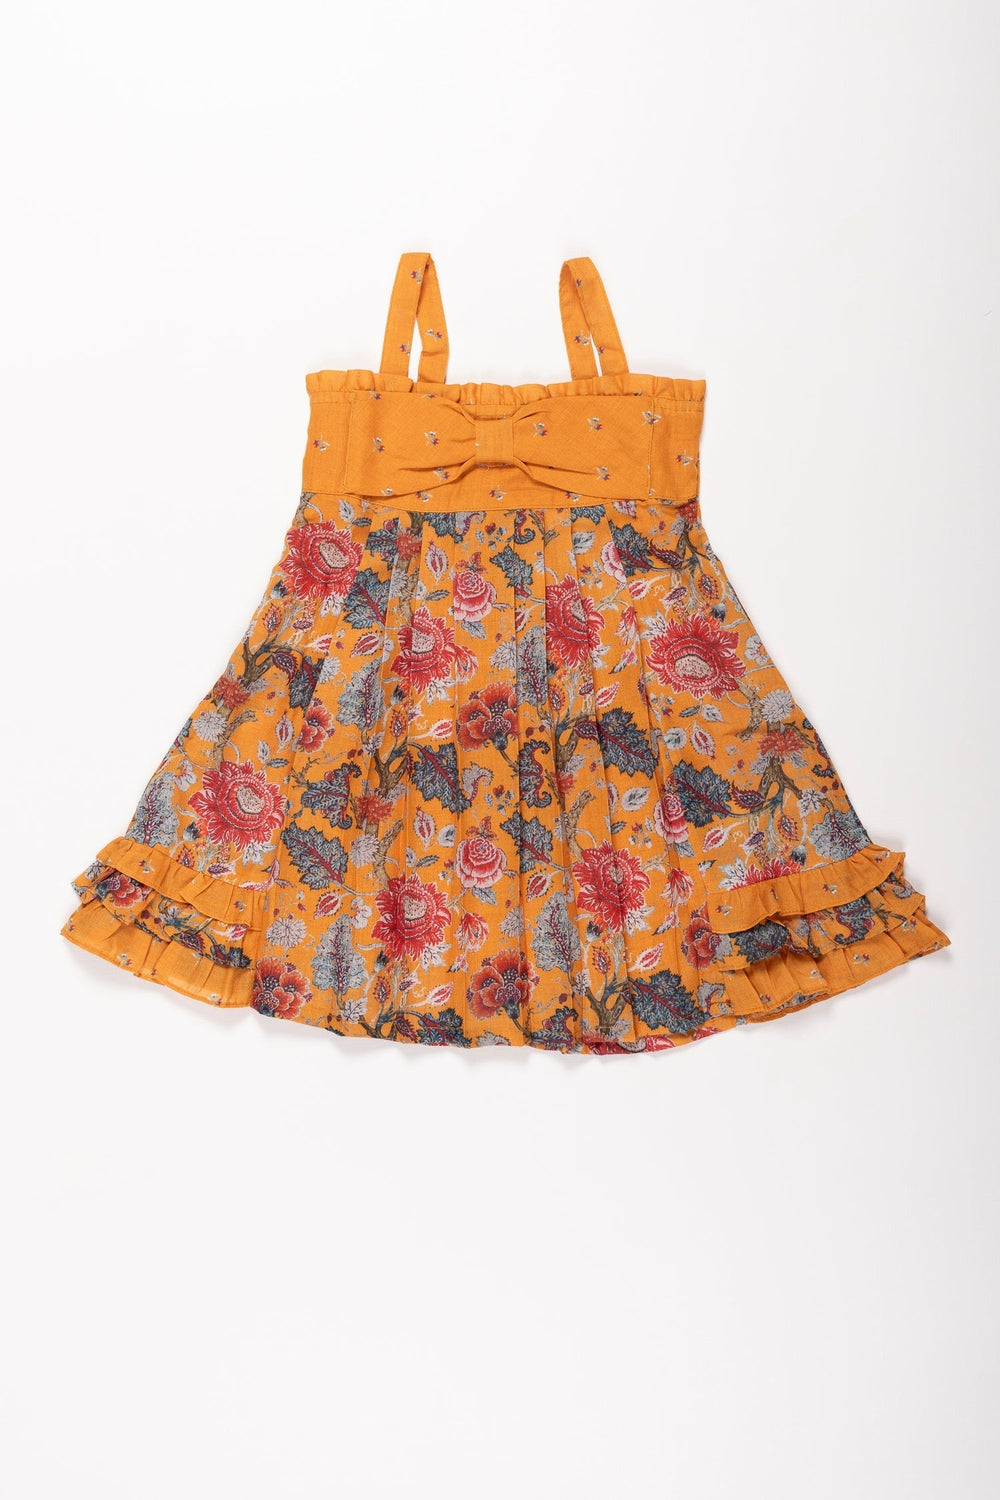 The Nesavu Girls Cotton Frock Sunny Floral Sleeveless Cotton Frock for Girls Nesavu Mustard Floral Printed Cotton Dress for Girls | Summer Chic Sleeveless Frock | The Nesavu